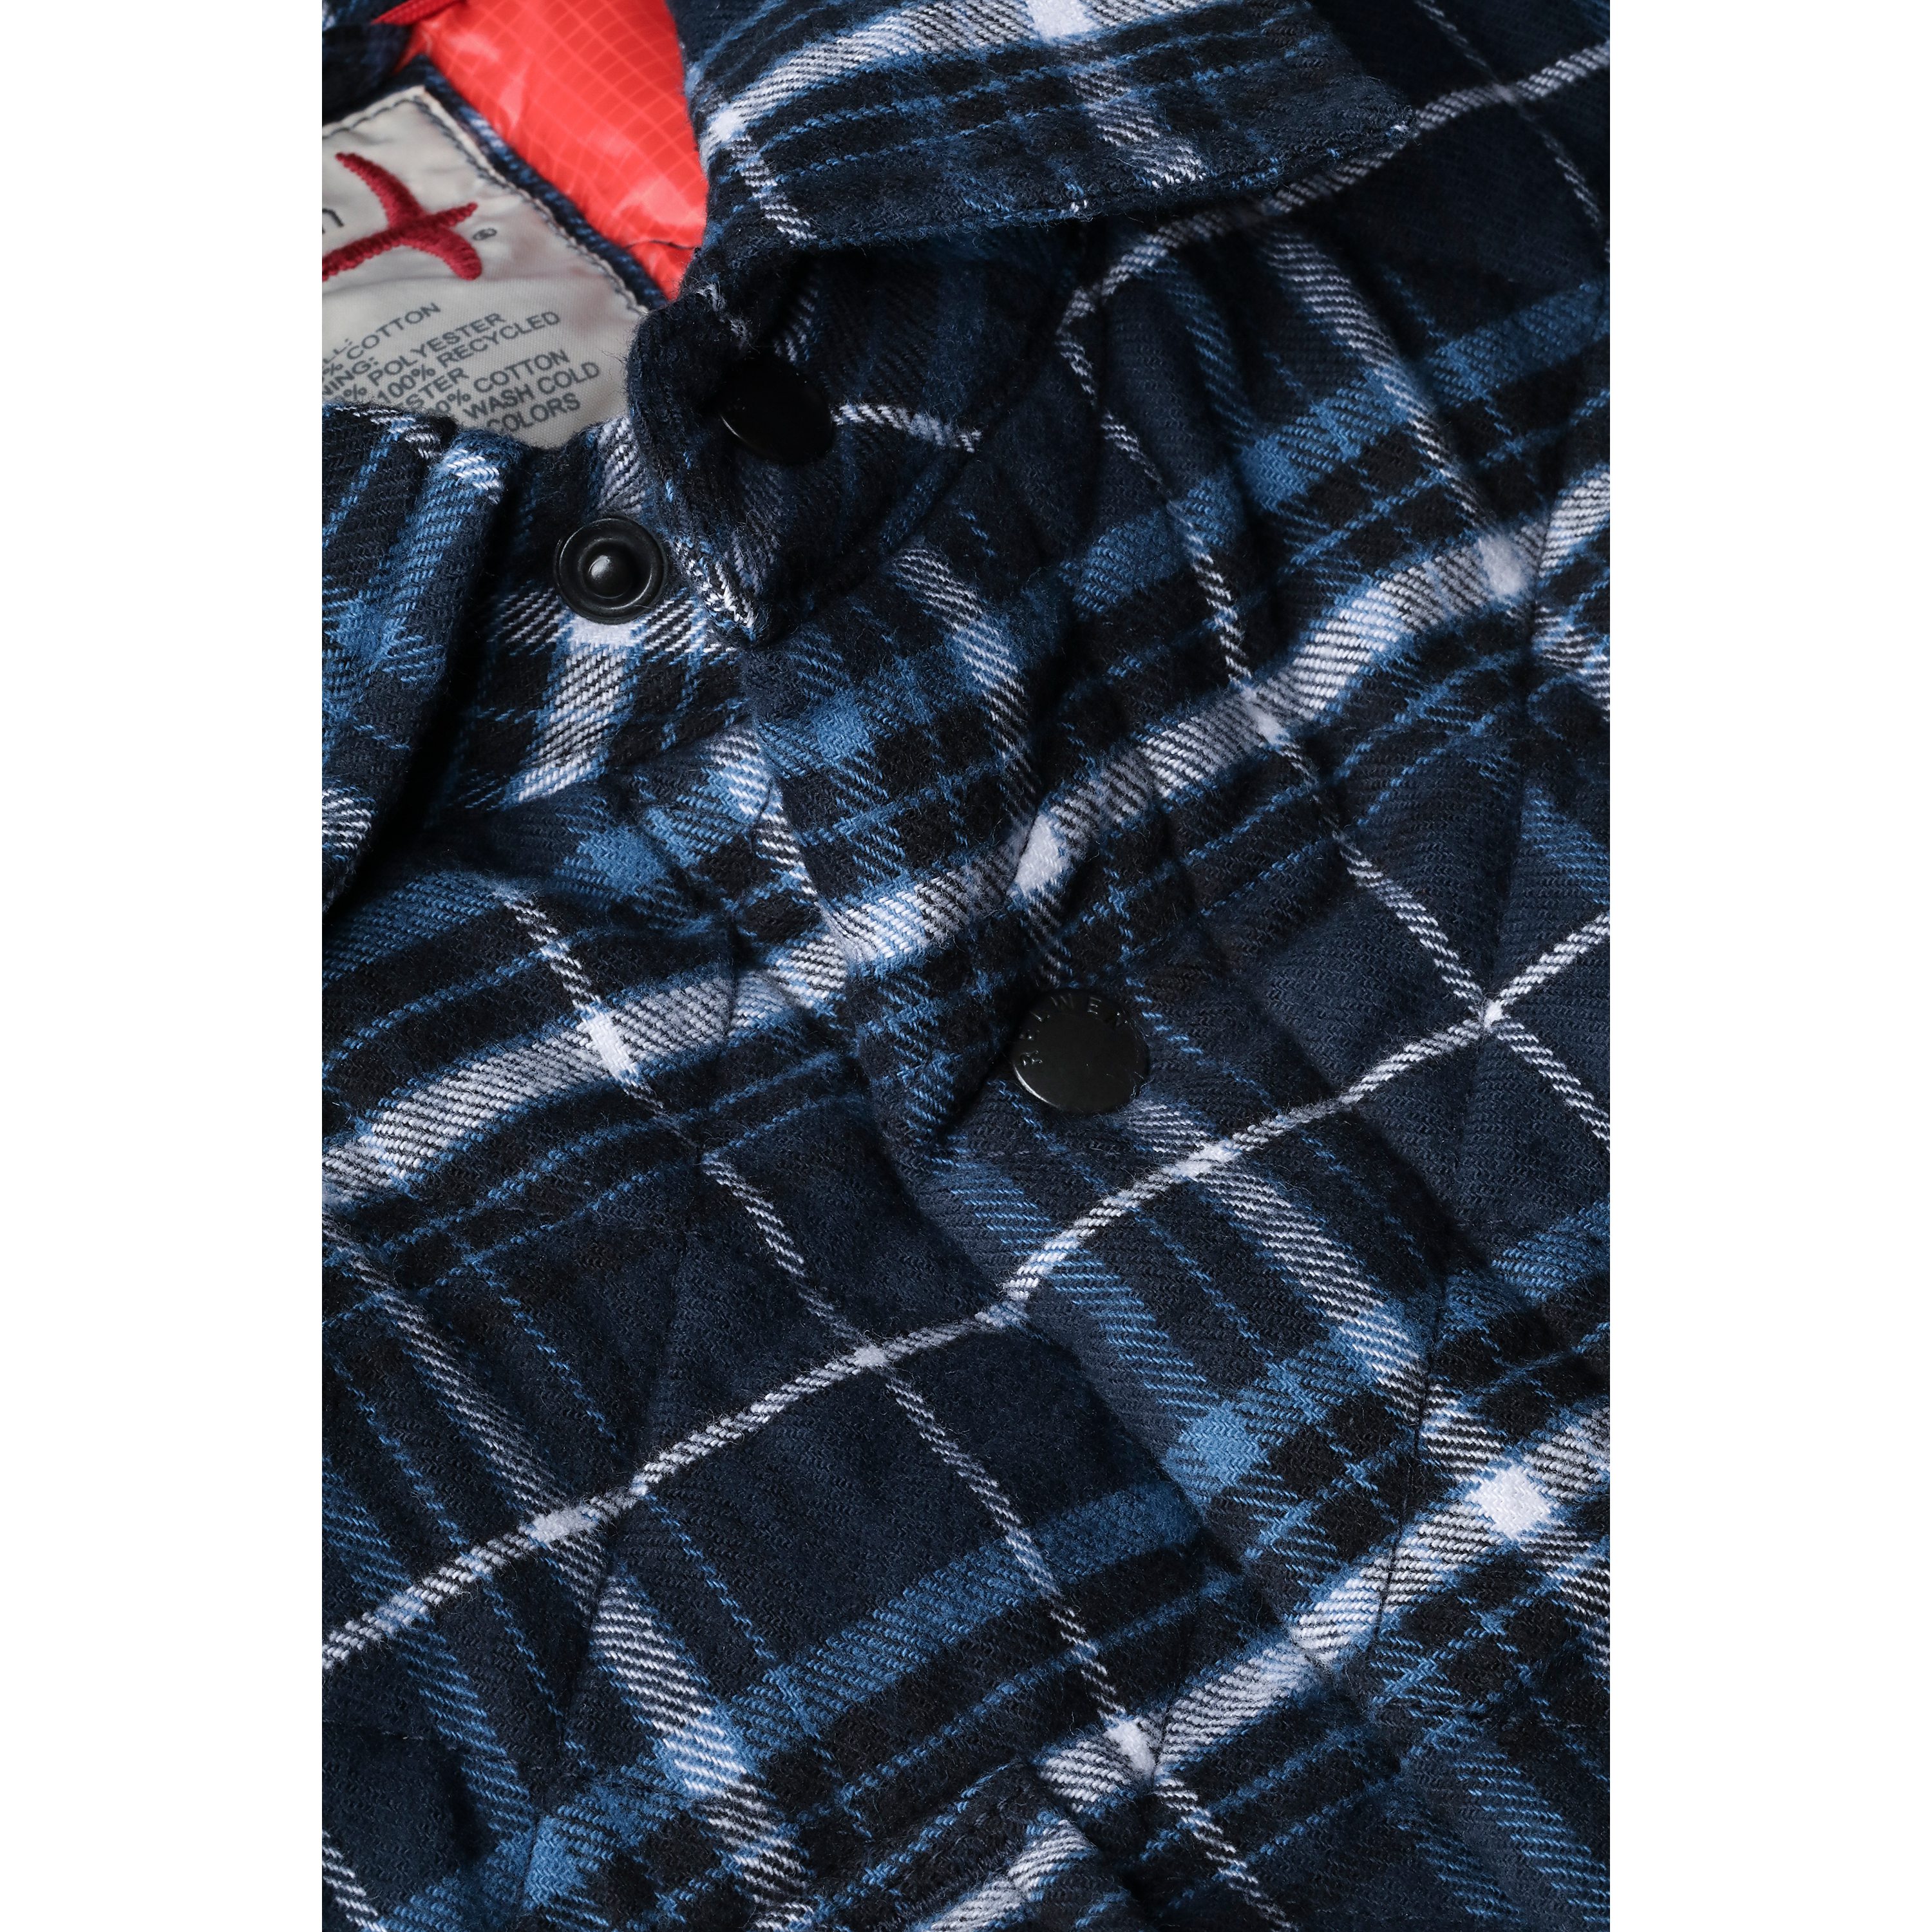 Relwen Quilted Flannel Shirt Jacket - Navy/Black/Blue Plaid